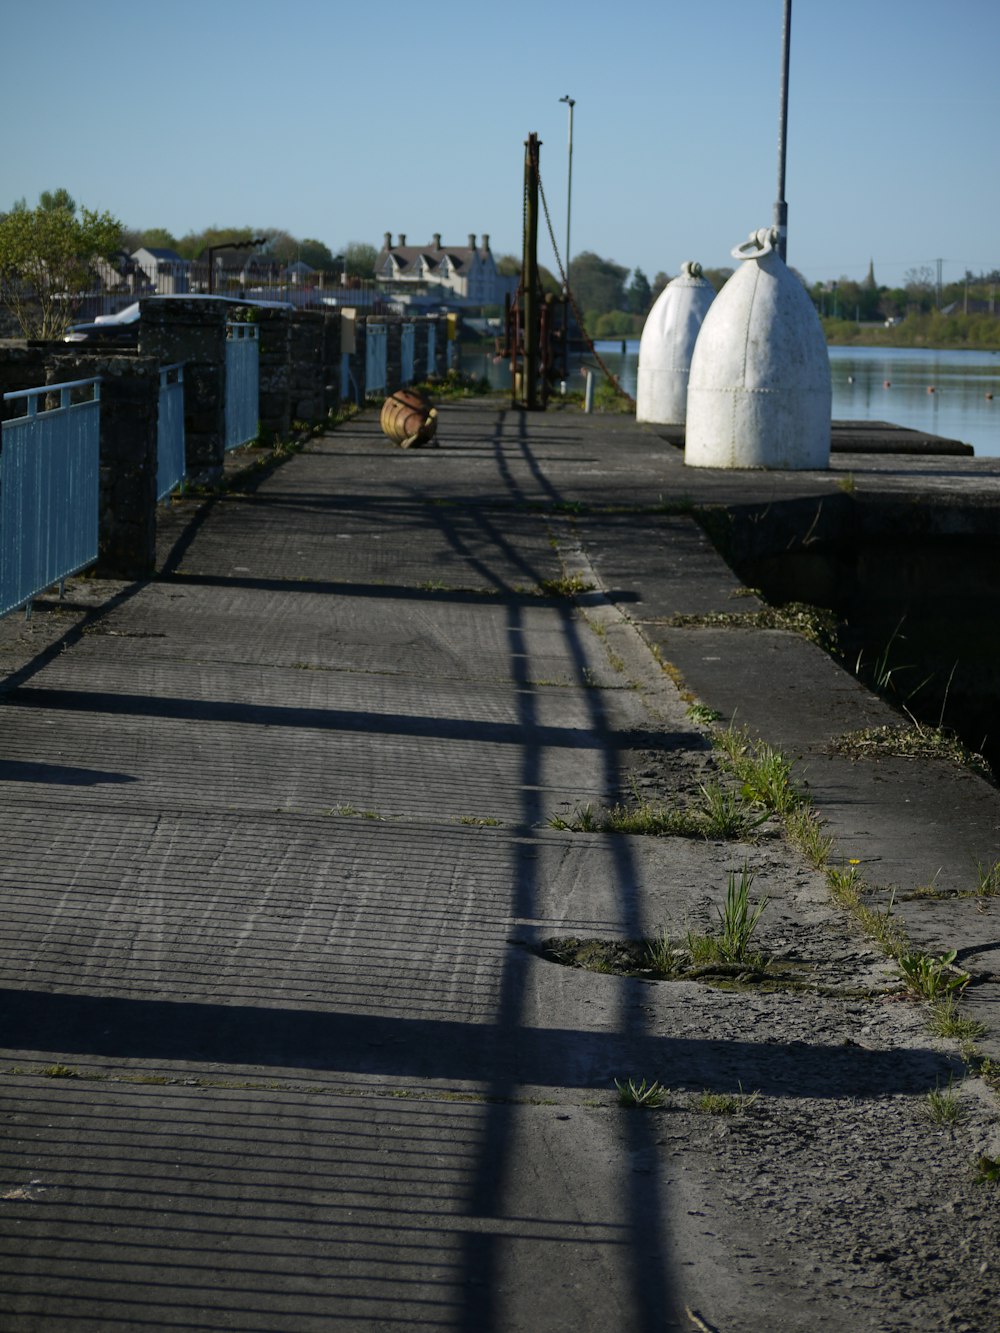 a view of a dock with a bird on it